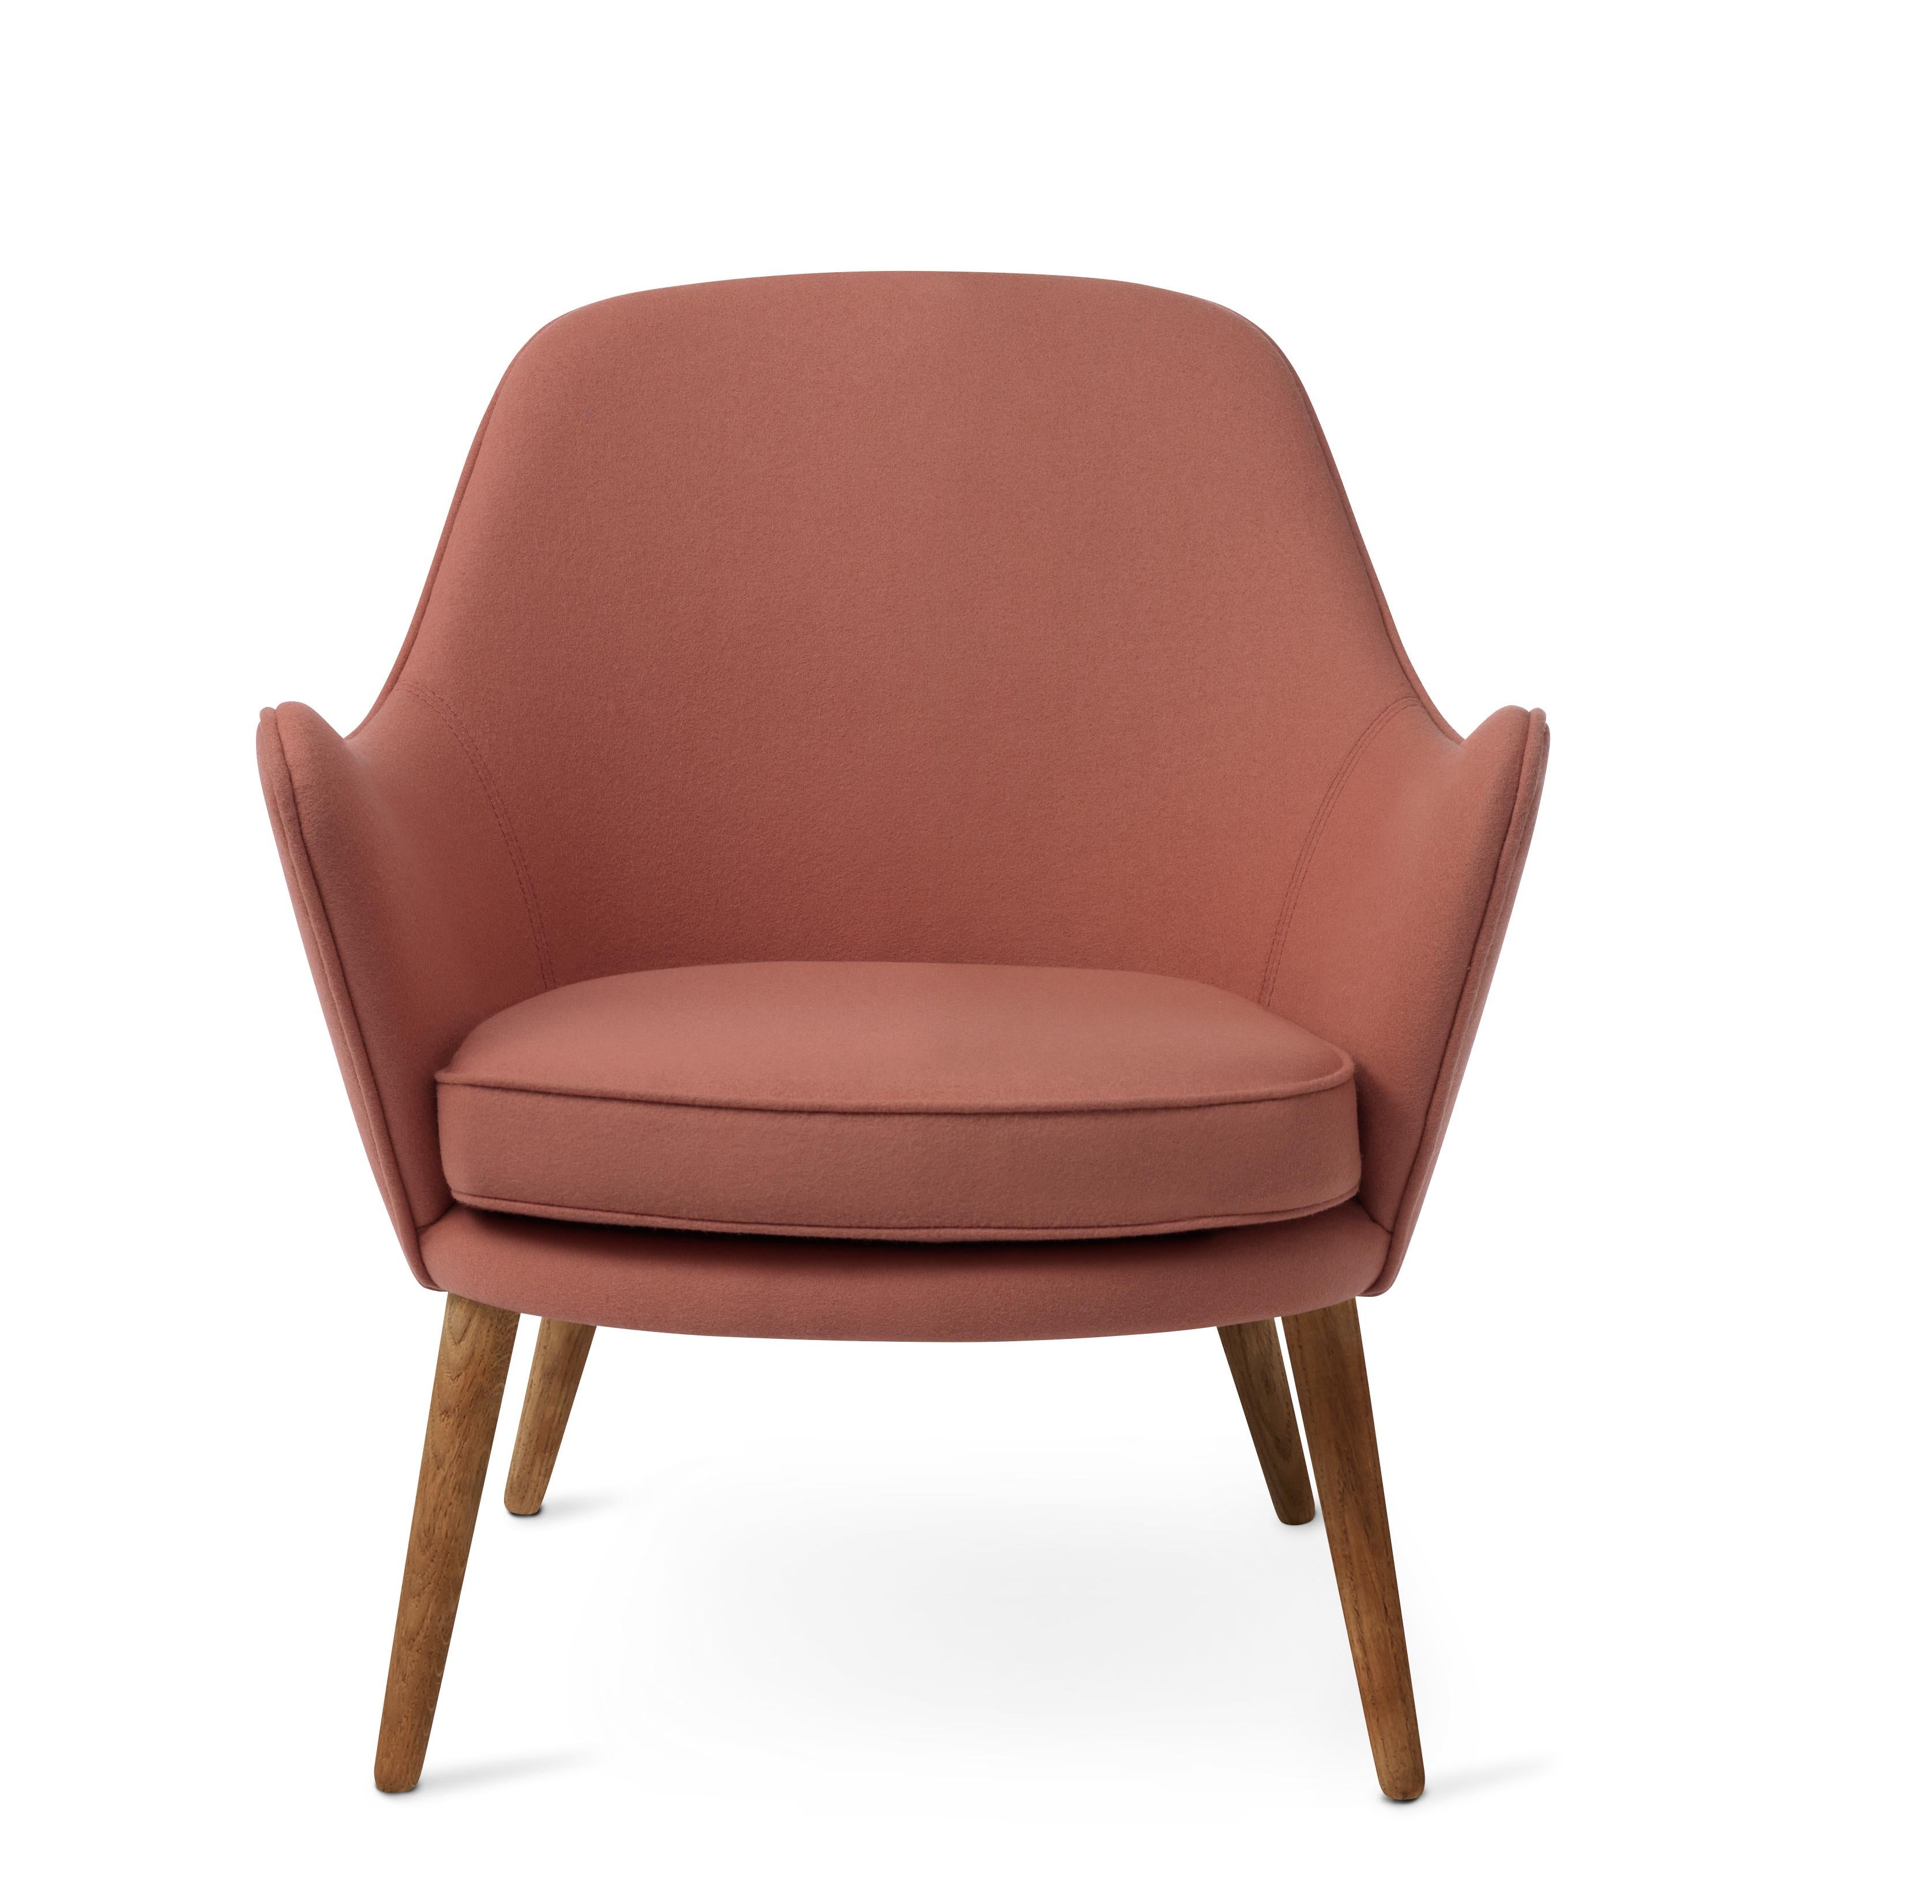 For Sale: Pink (Hero 511) Dwell Lounge Chair, by Hans Olsen from Warm Nordic